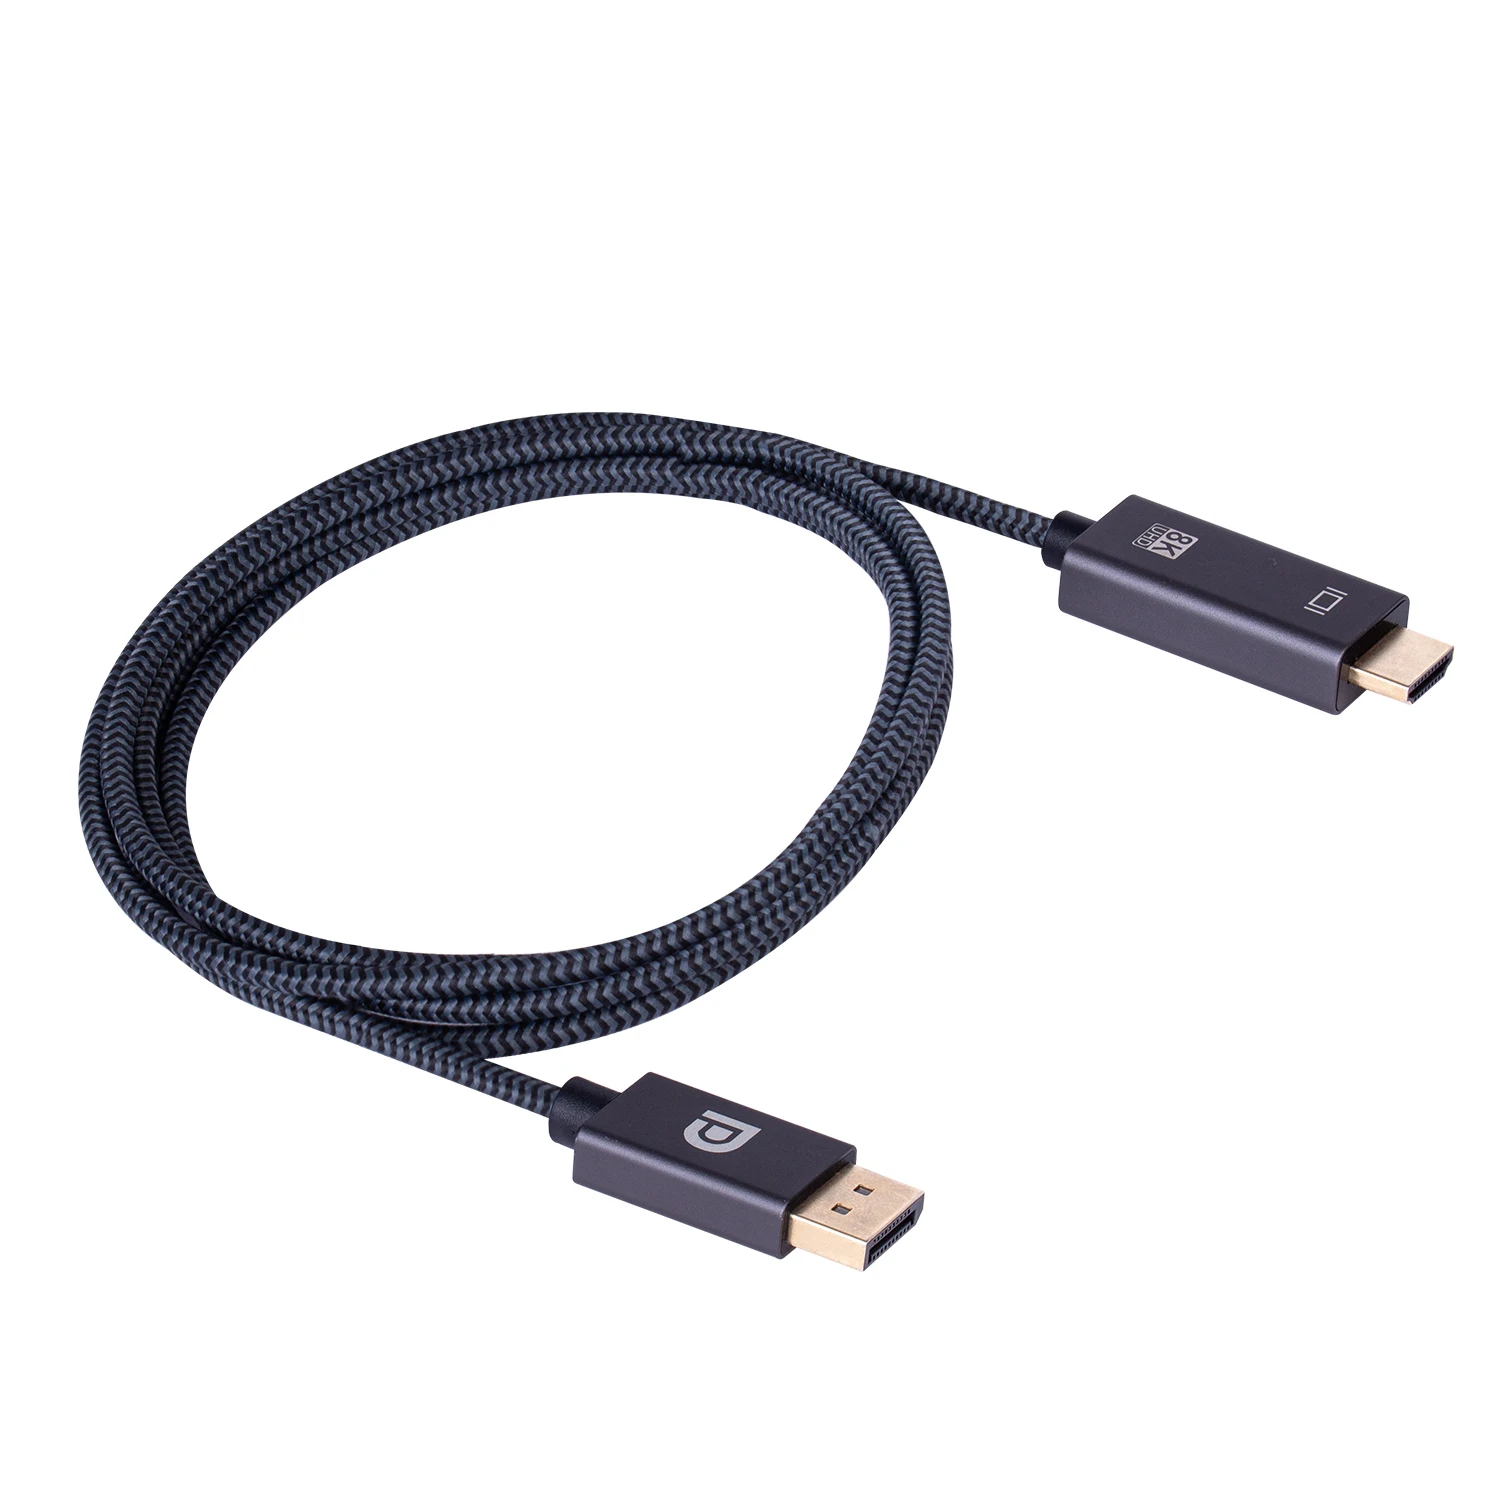 DisplayPort DP to HDMI Adapter Cable Male to Male for Computer, Monitor, Projector, TV , NVIDIA, AMD & More